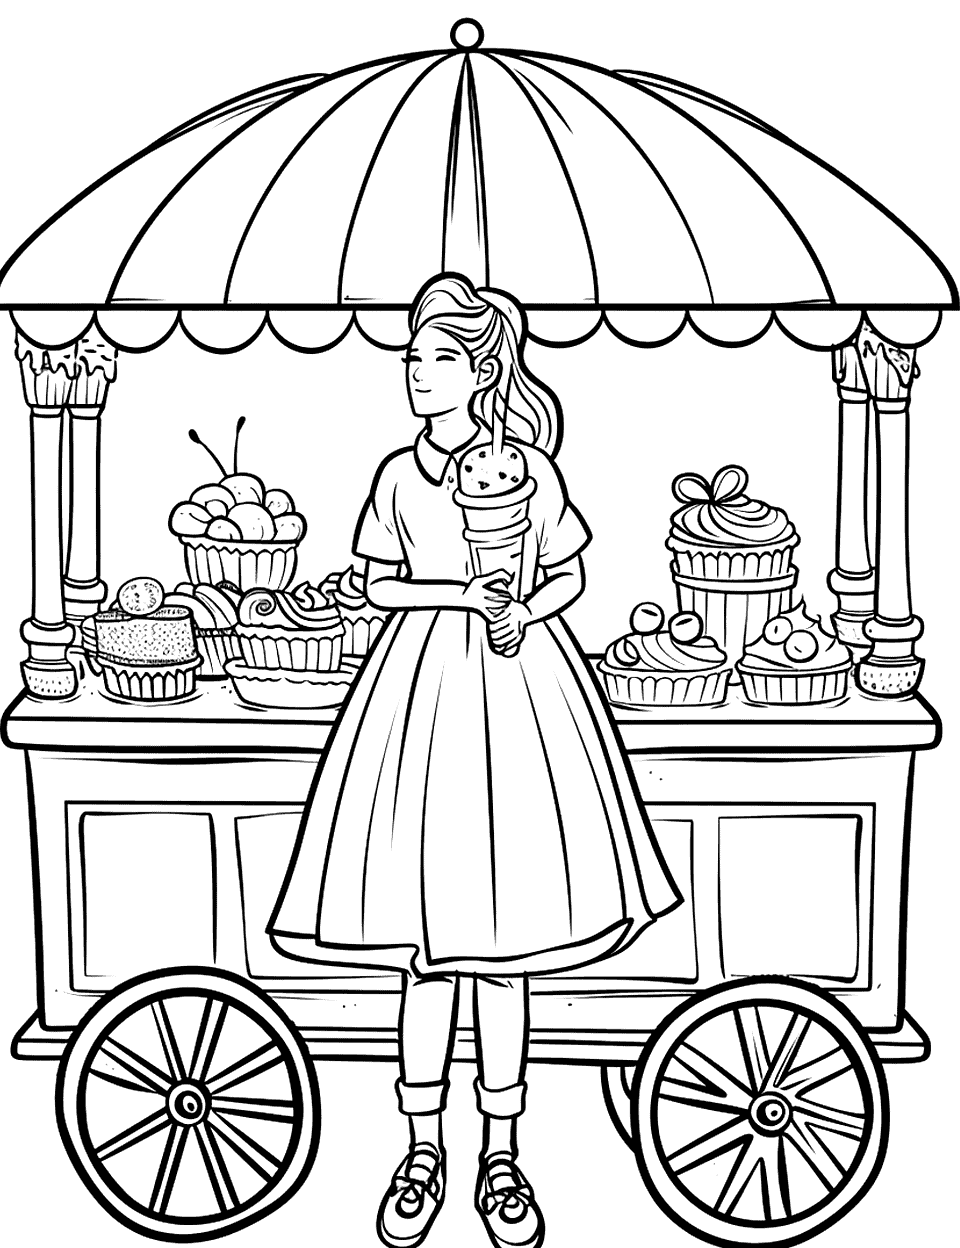 Ice Cream Cart at the Reception Wedding Coloring Page - A festive ice cream cart ready to serve treats to guests at an outdoor wedding.